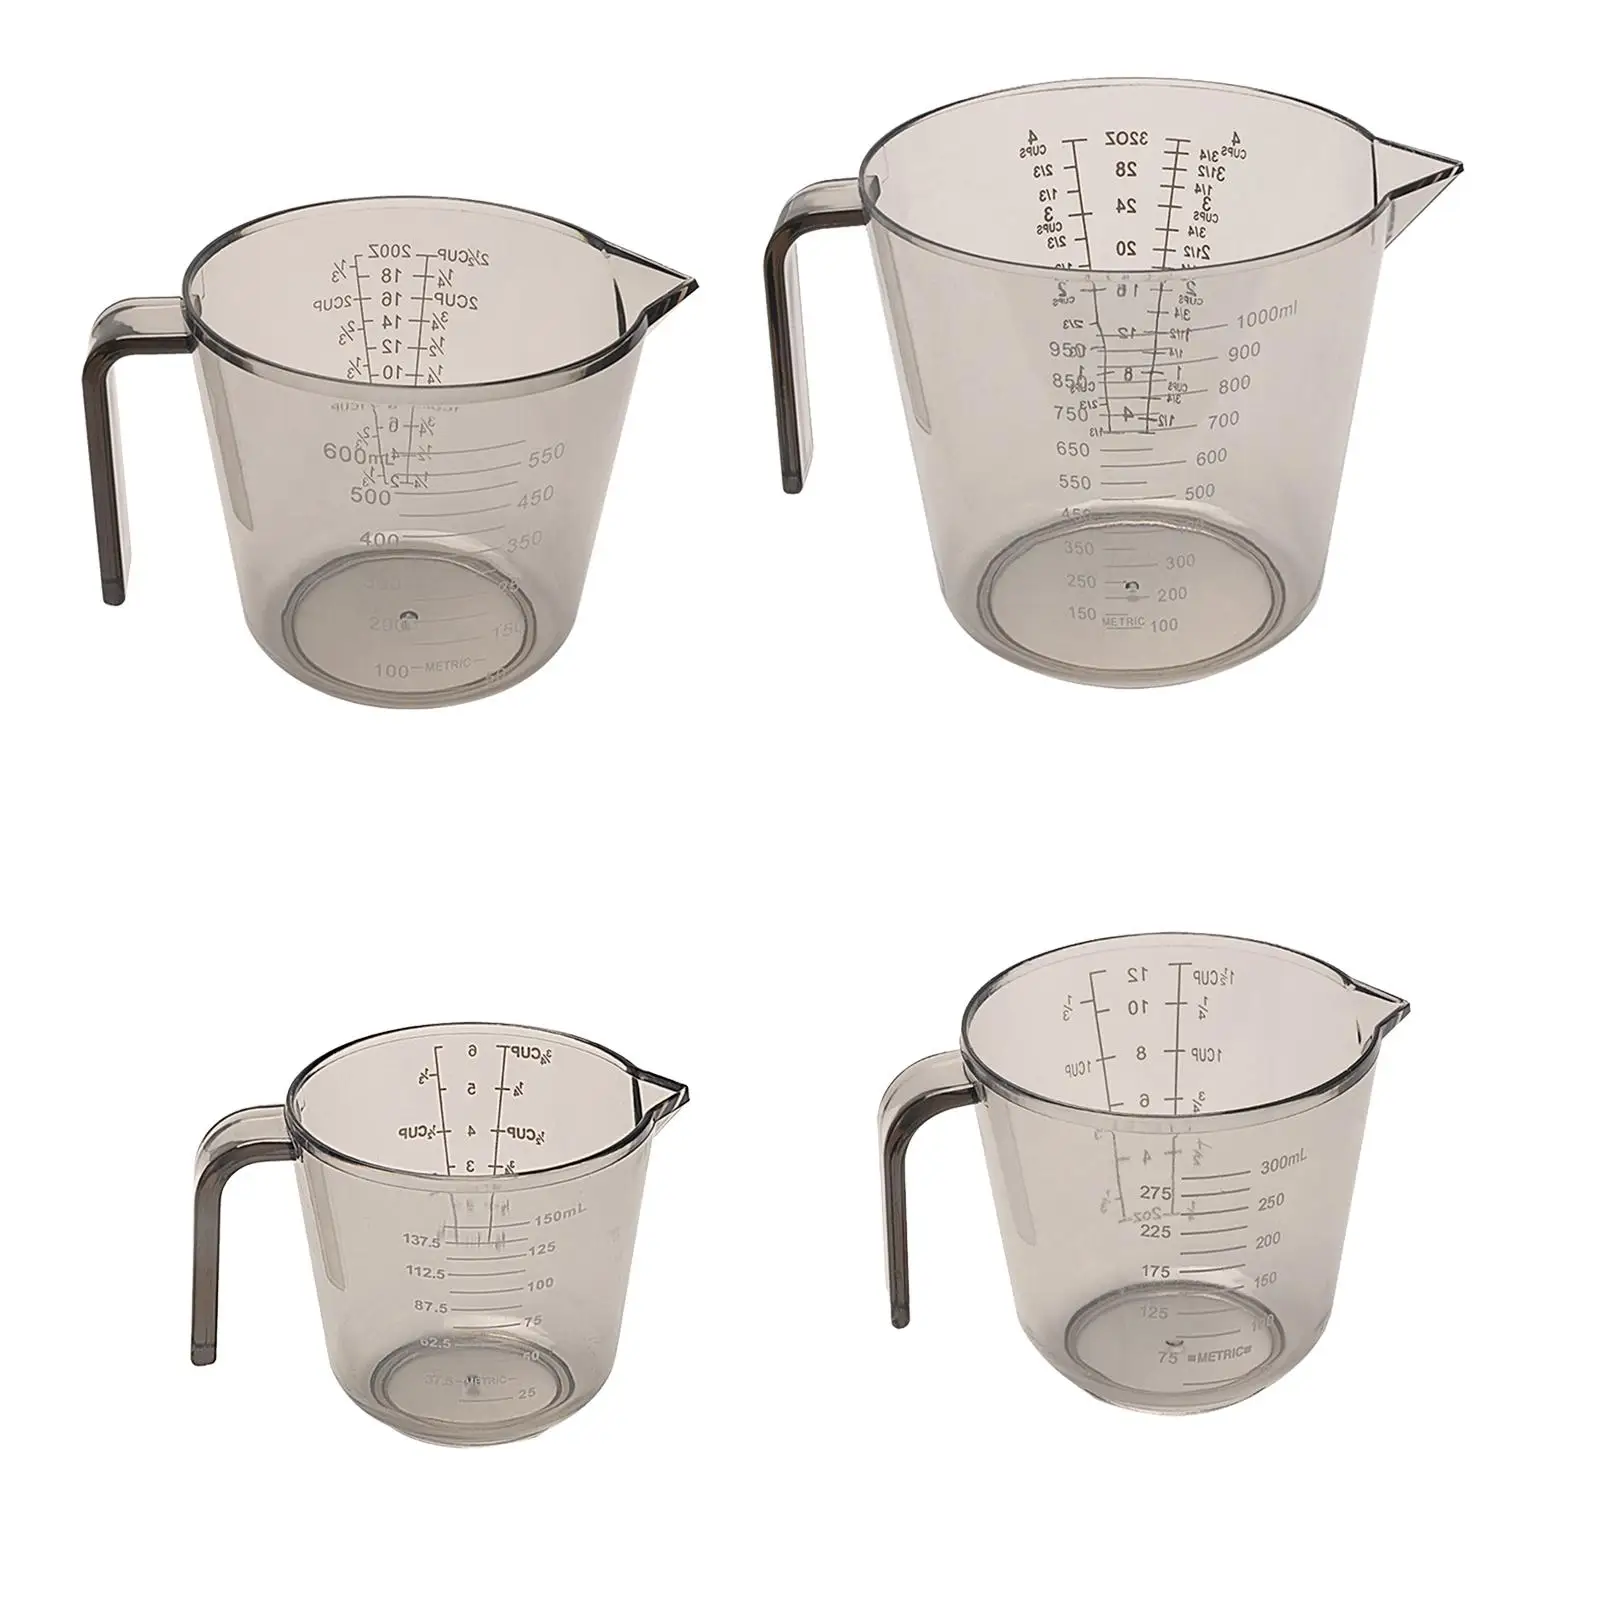 4Pcs Measuring Cups Coffee Durable Reusable Scales Beaker Transparent with Handle Measure Jugs Container for Kitchen Fittings